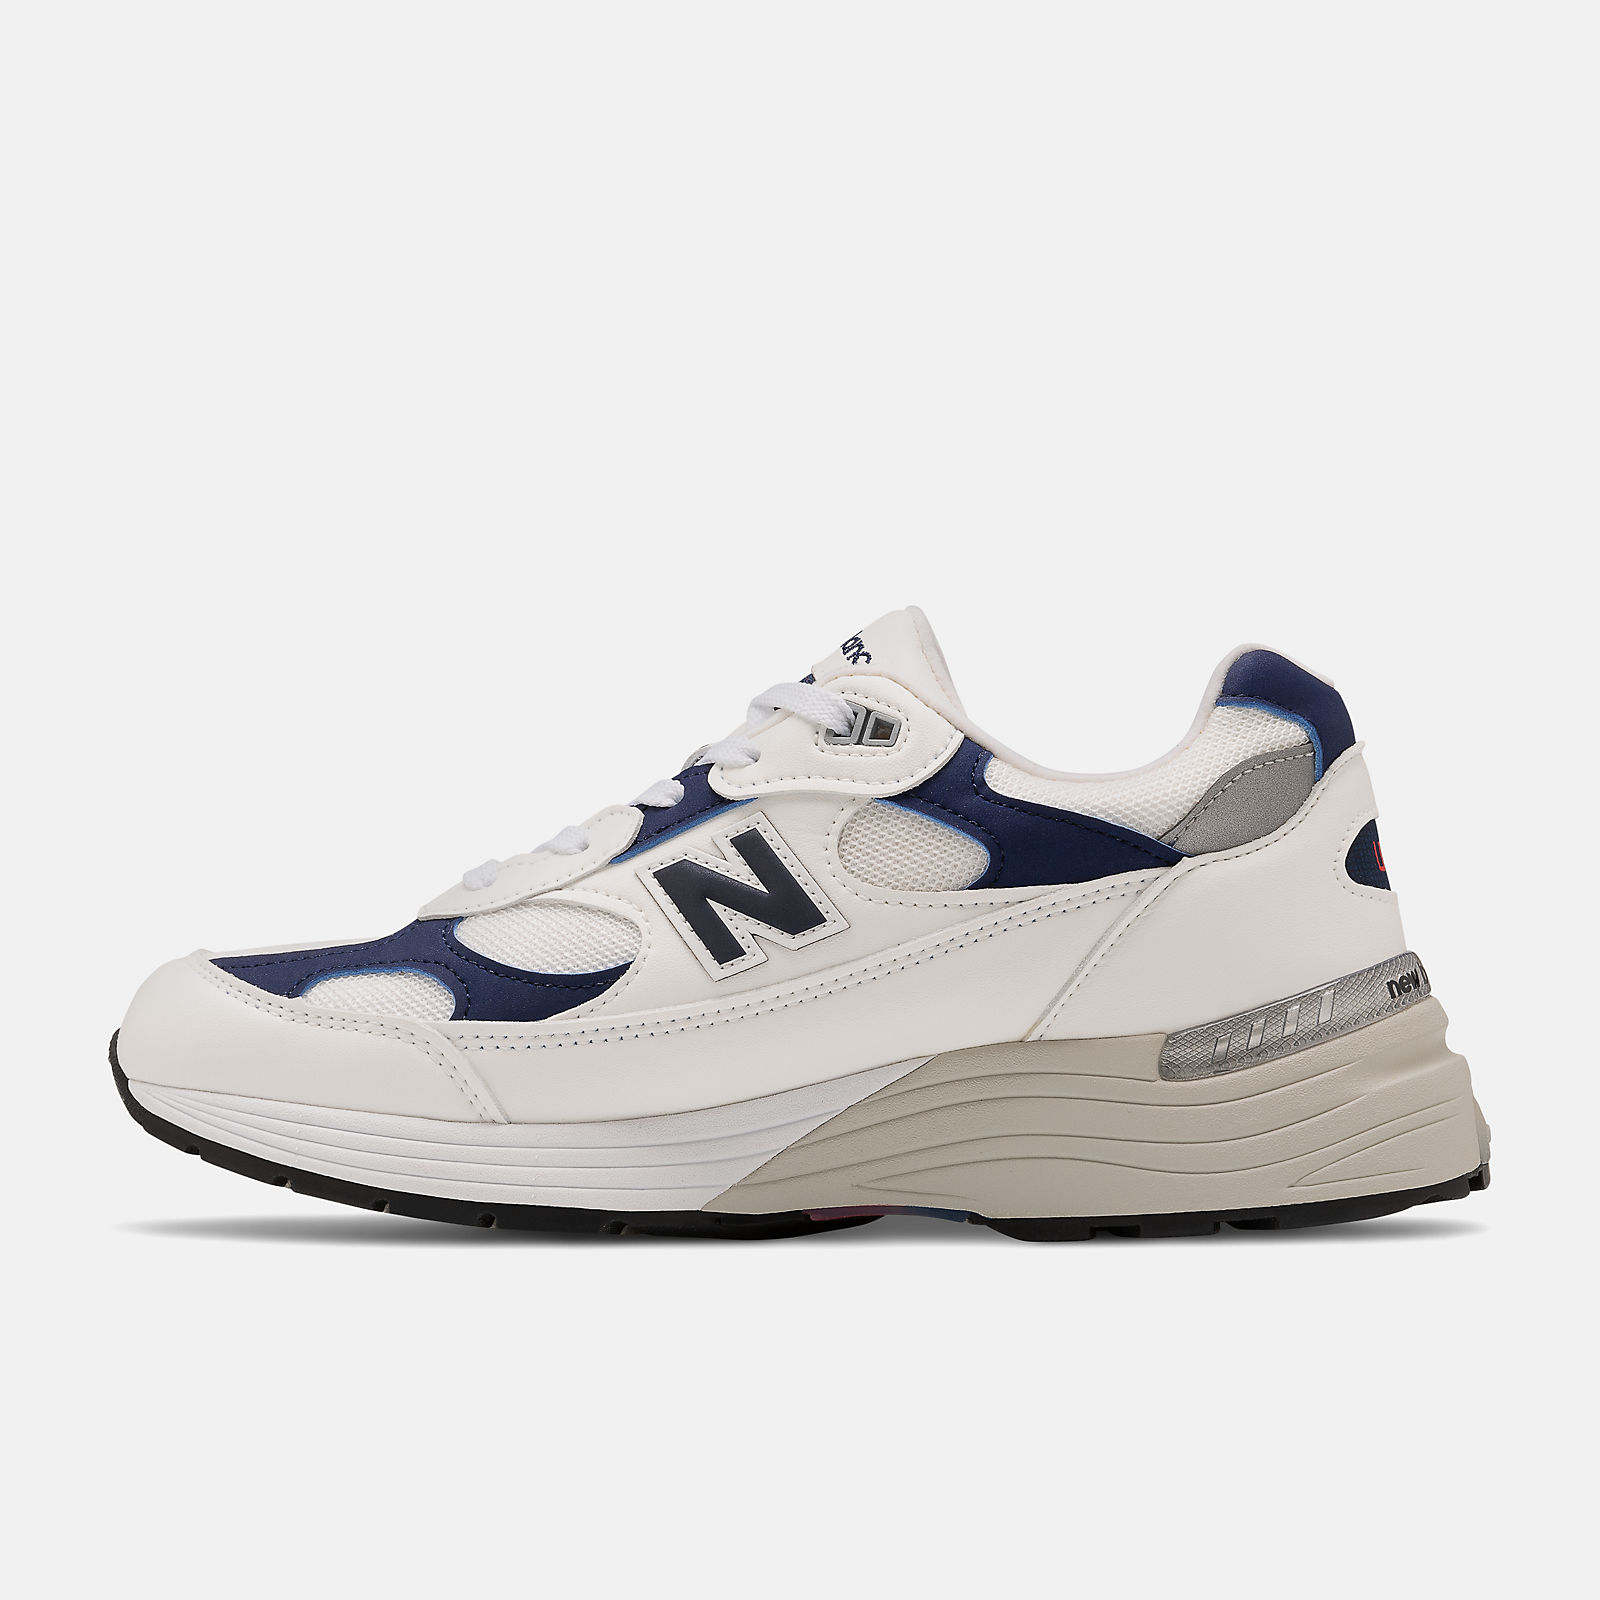 Made In US 992 - New Balance